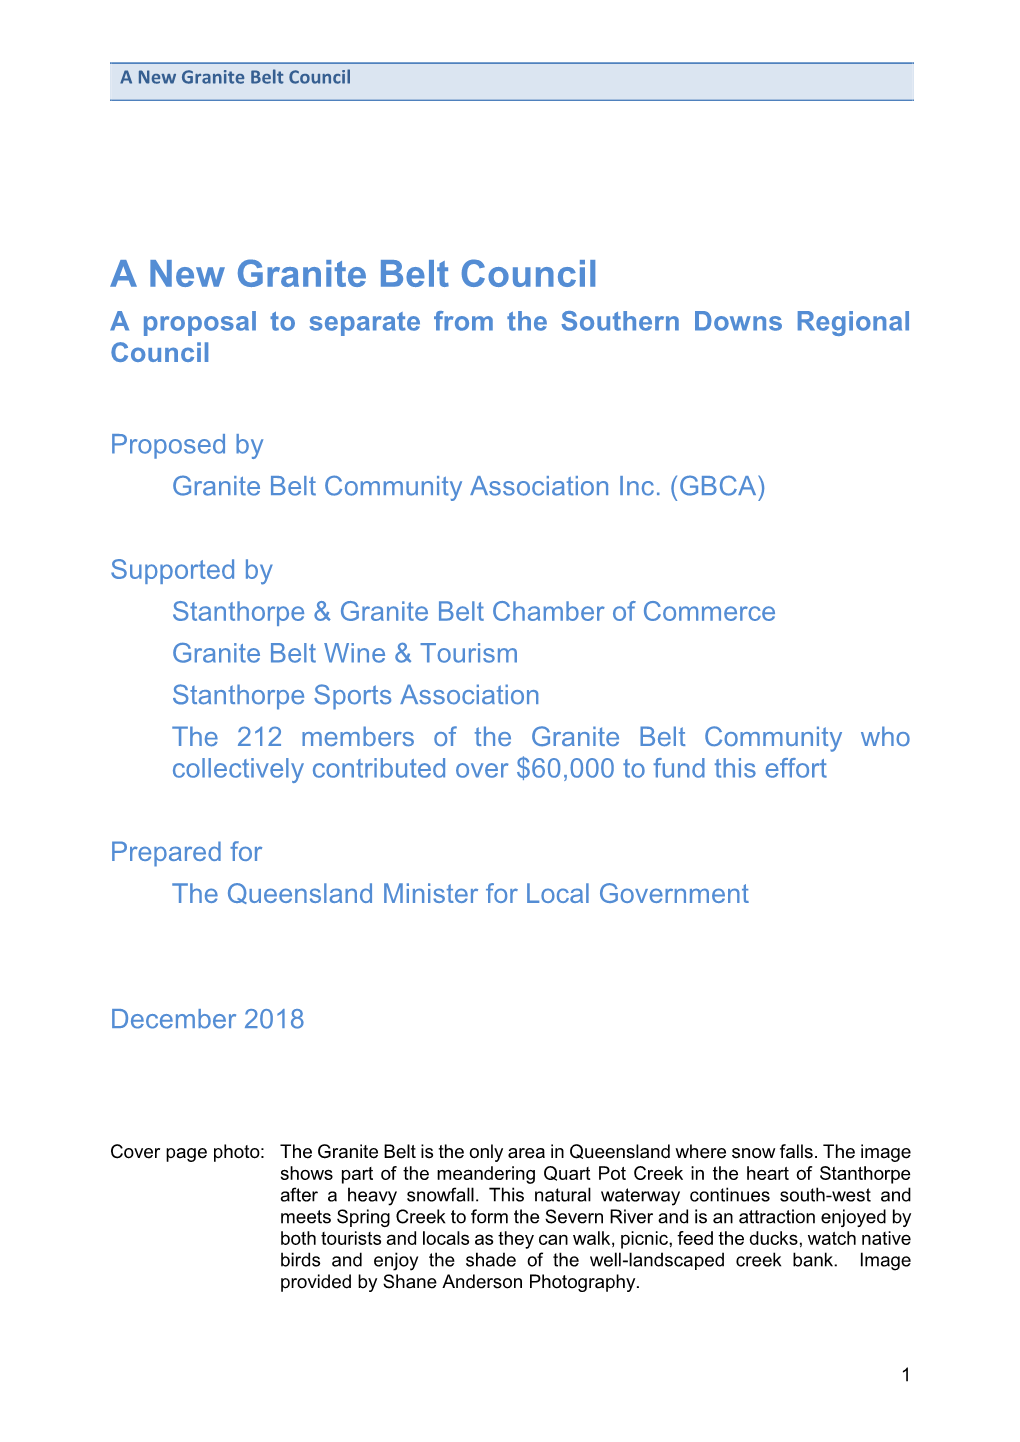 A New Granite Belt Council – a Proposal To